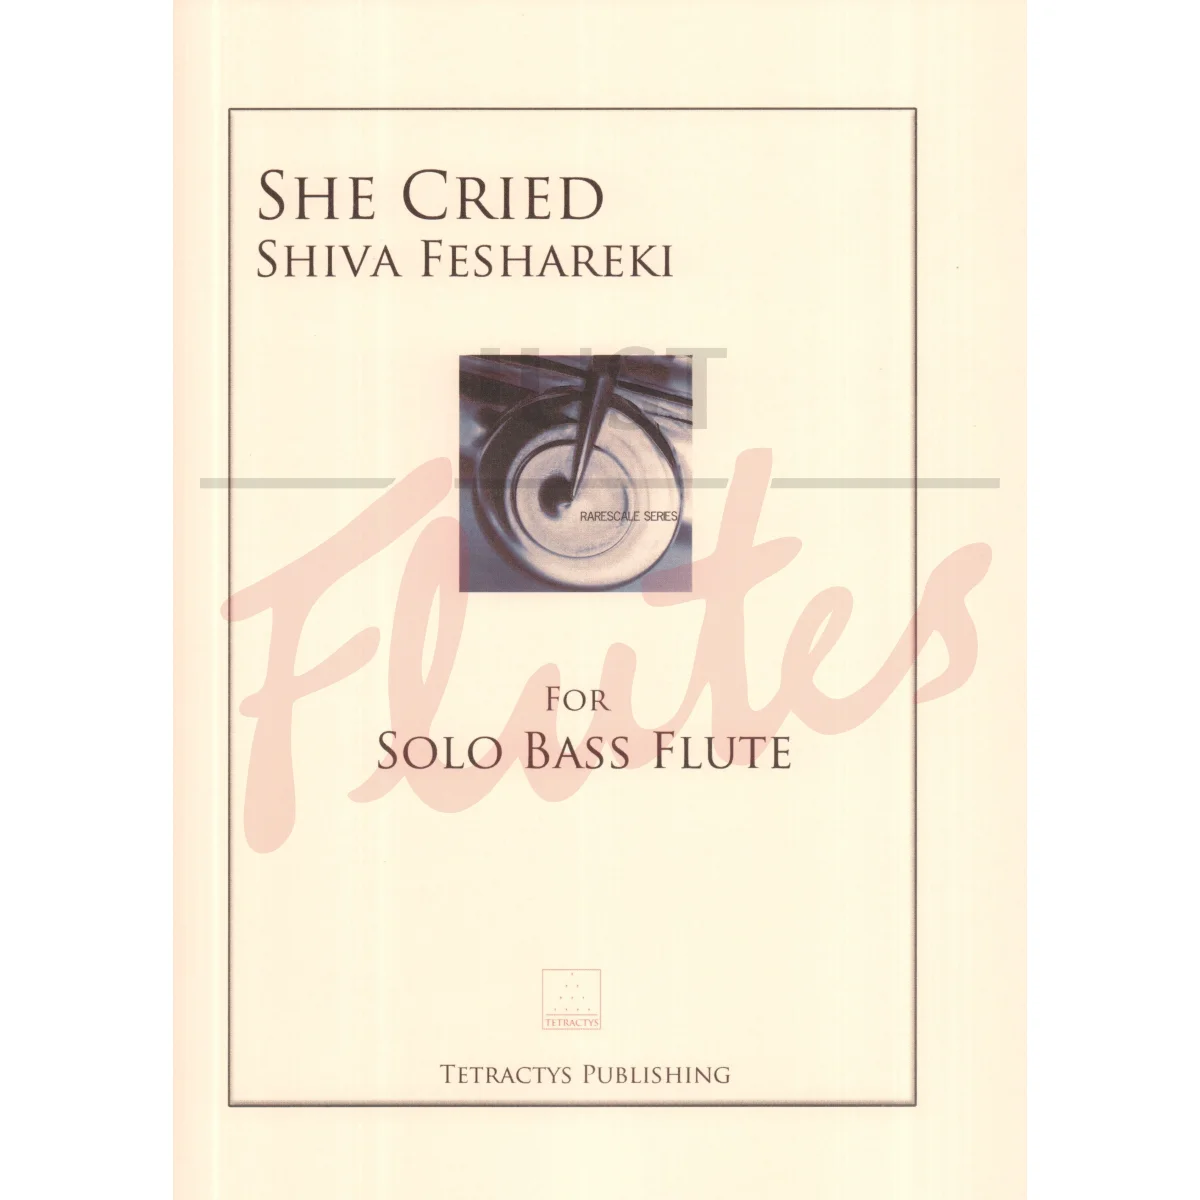 She Cried for Solo Bass Flute